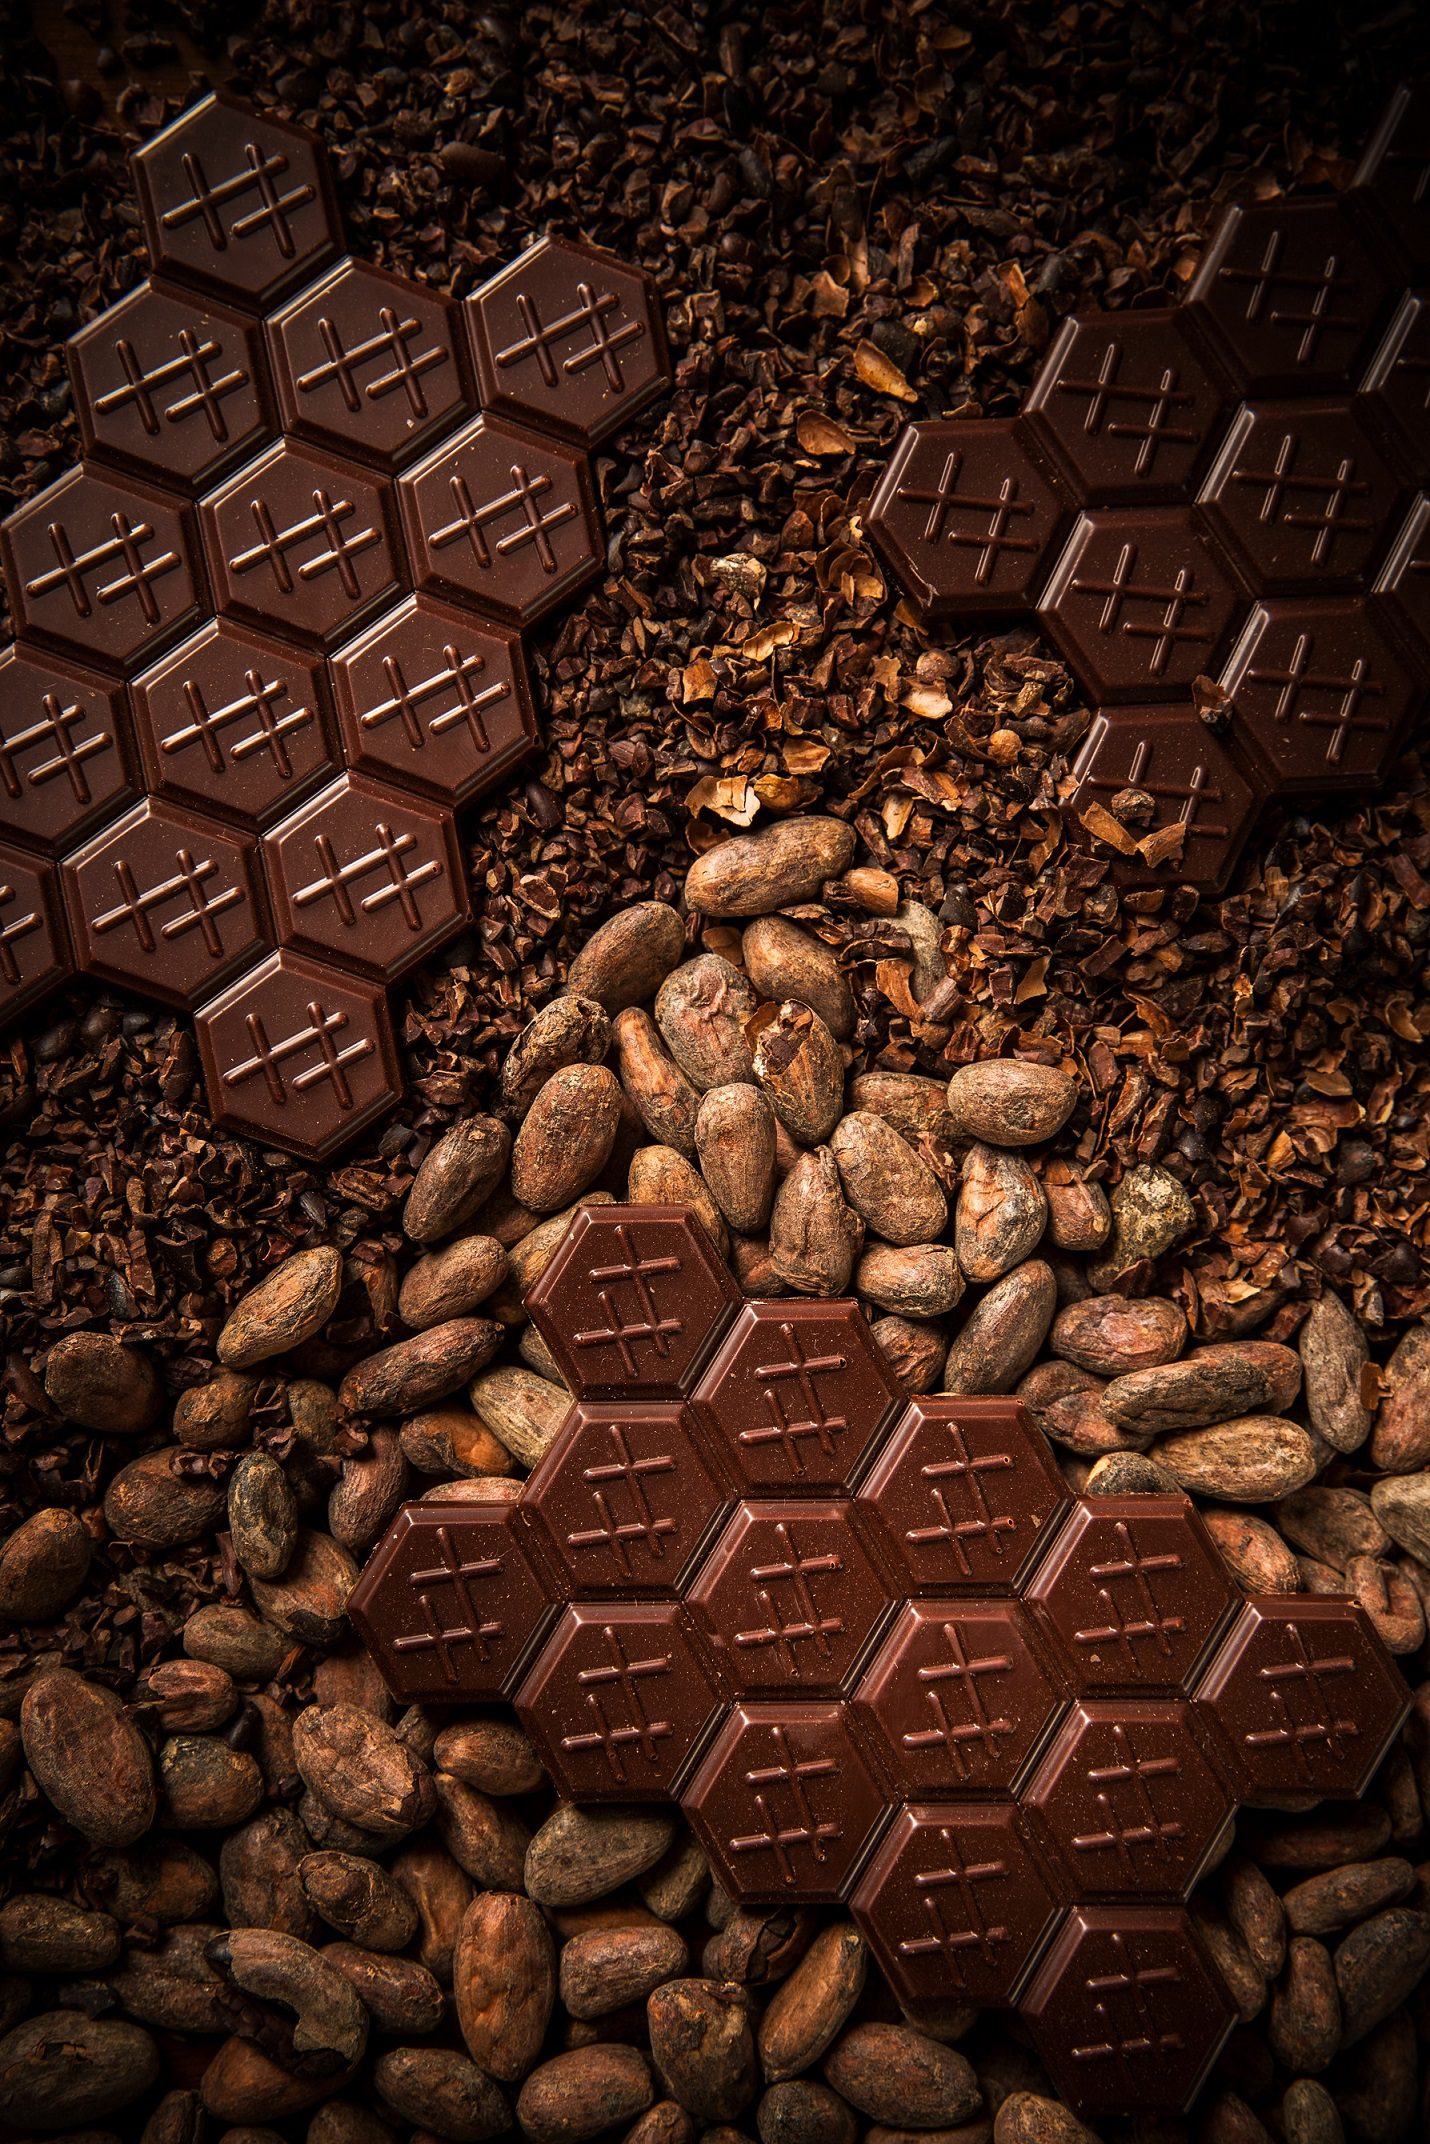 HEXX Chocolate by Anthony Mair